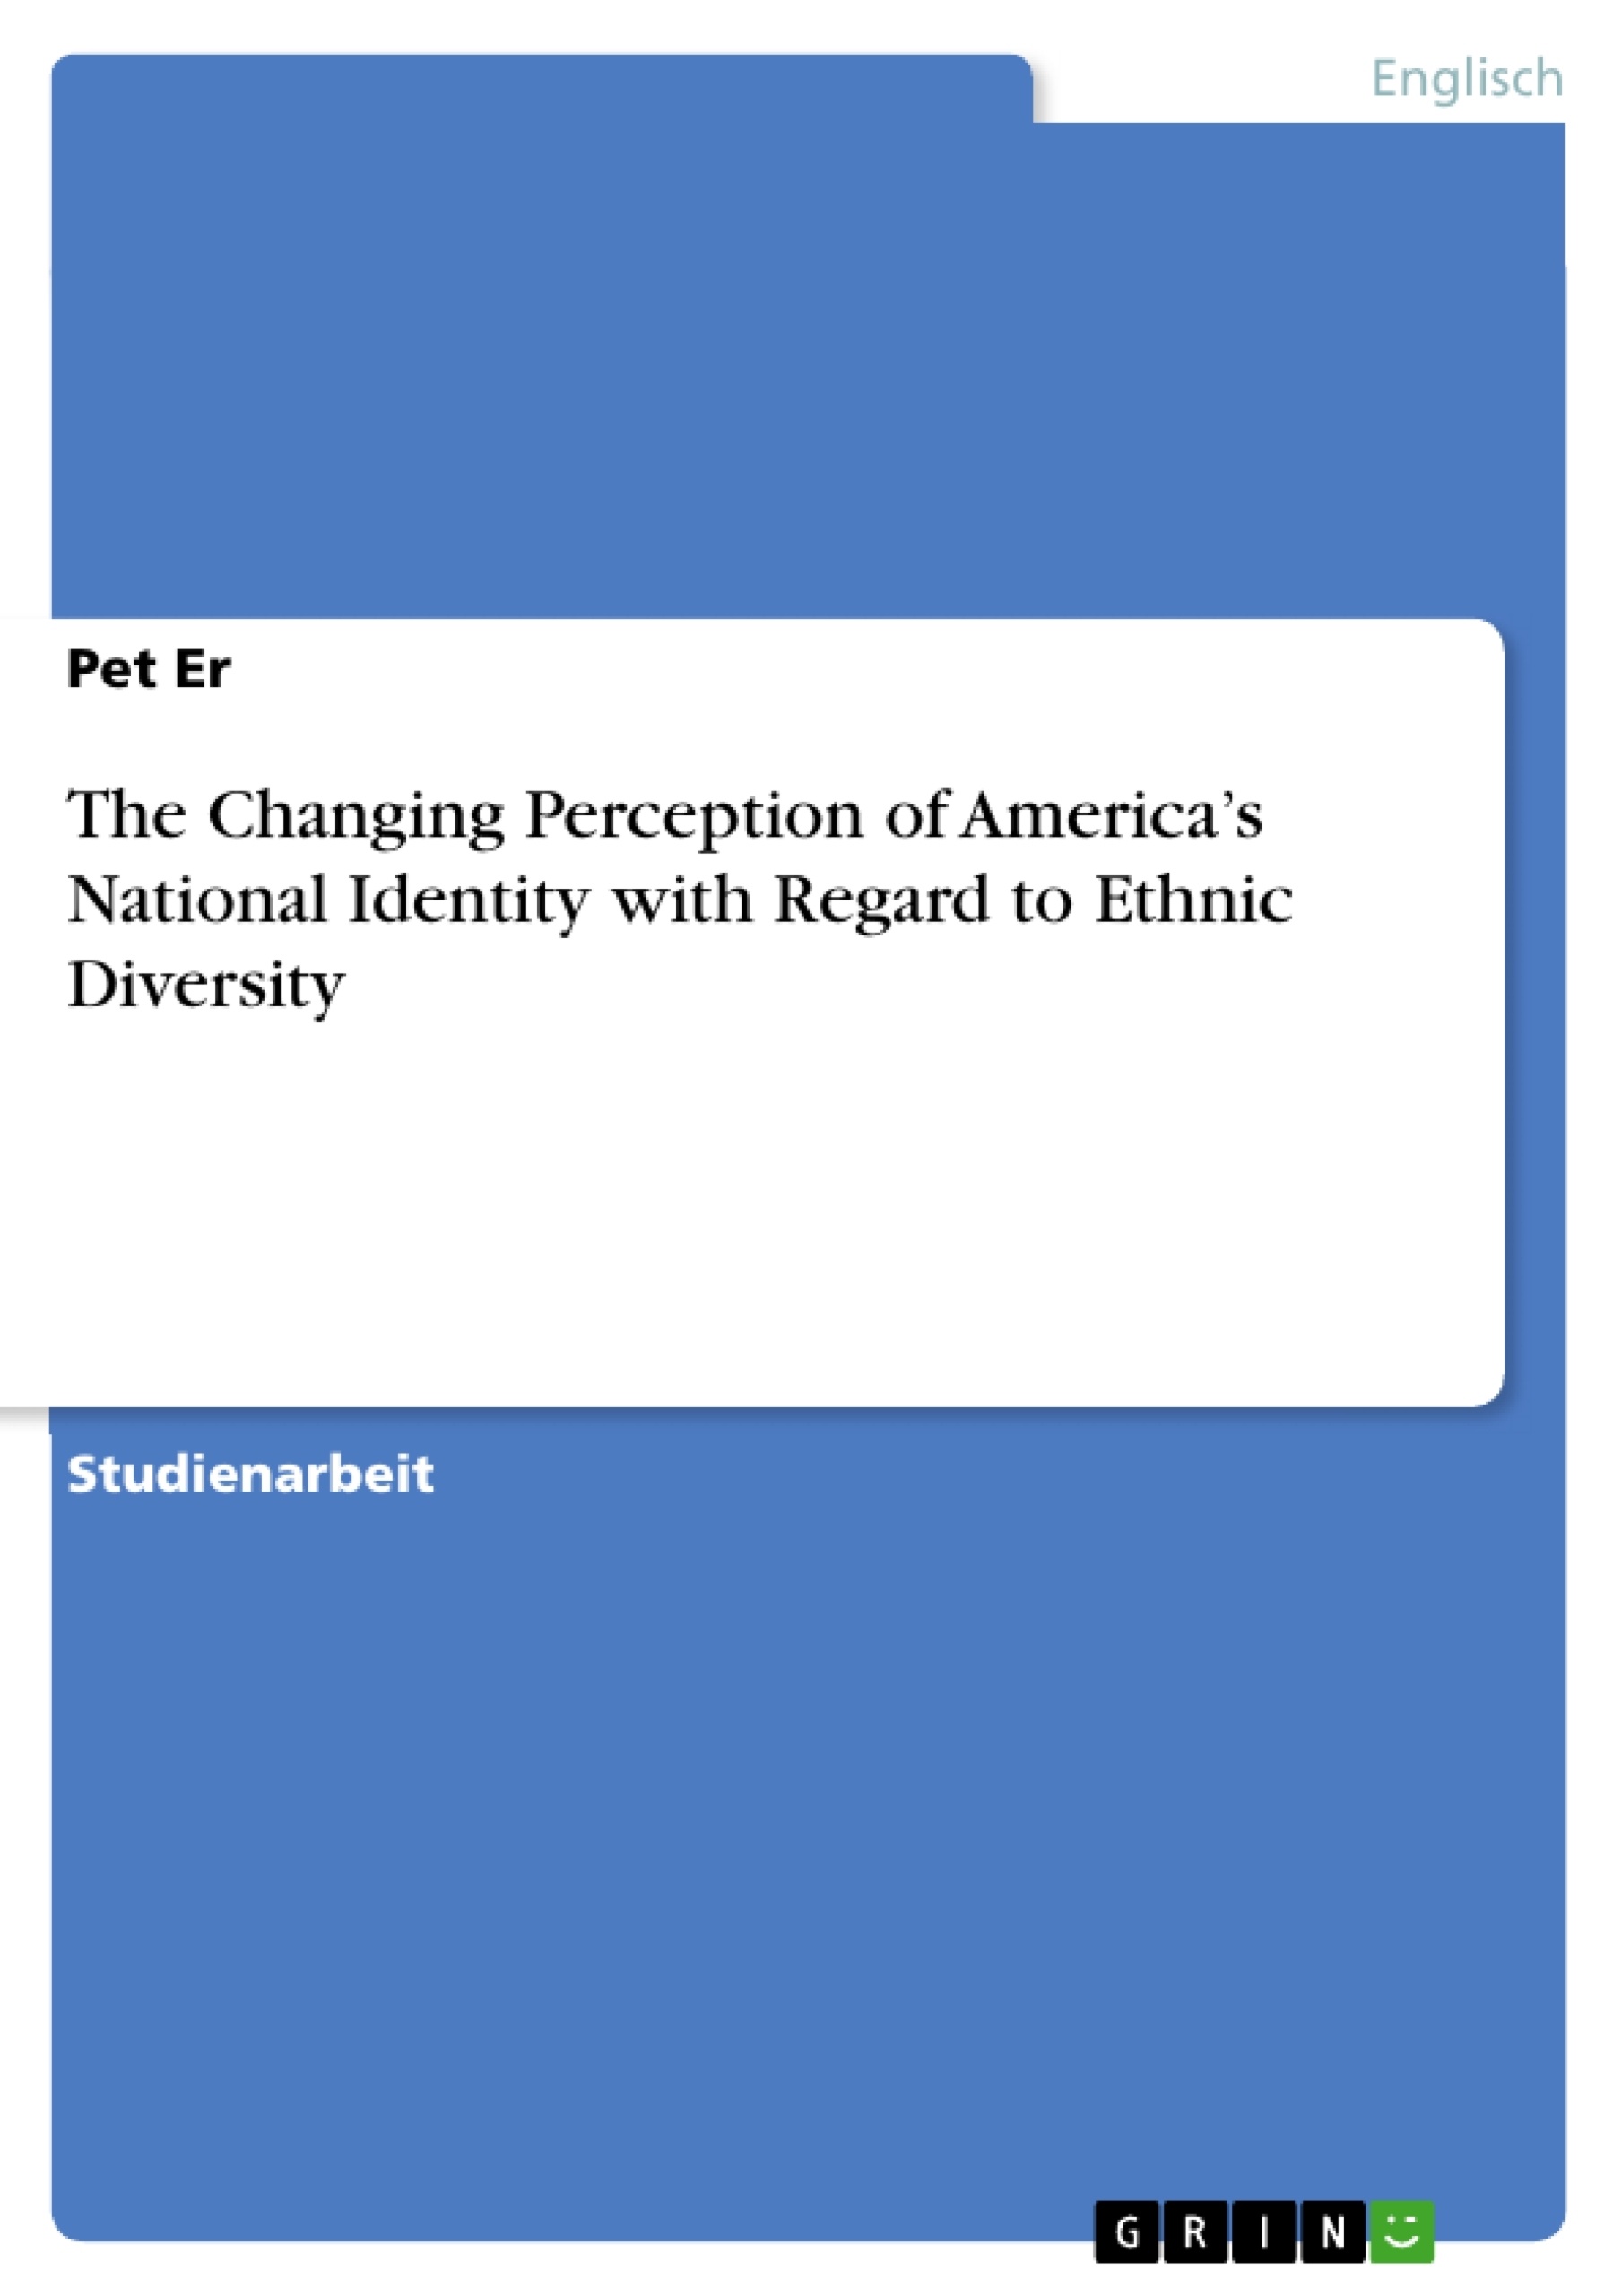 Título: The Changing Perception of America’s National Identity with Regard to Ethnic Diversity